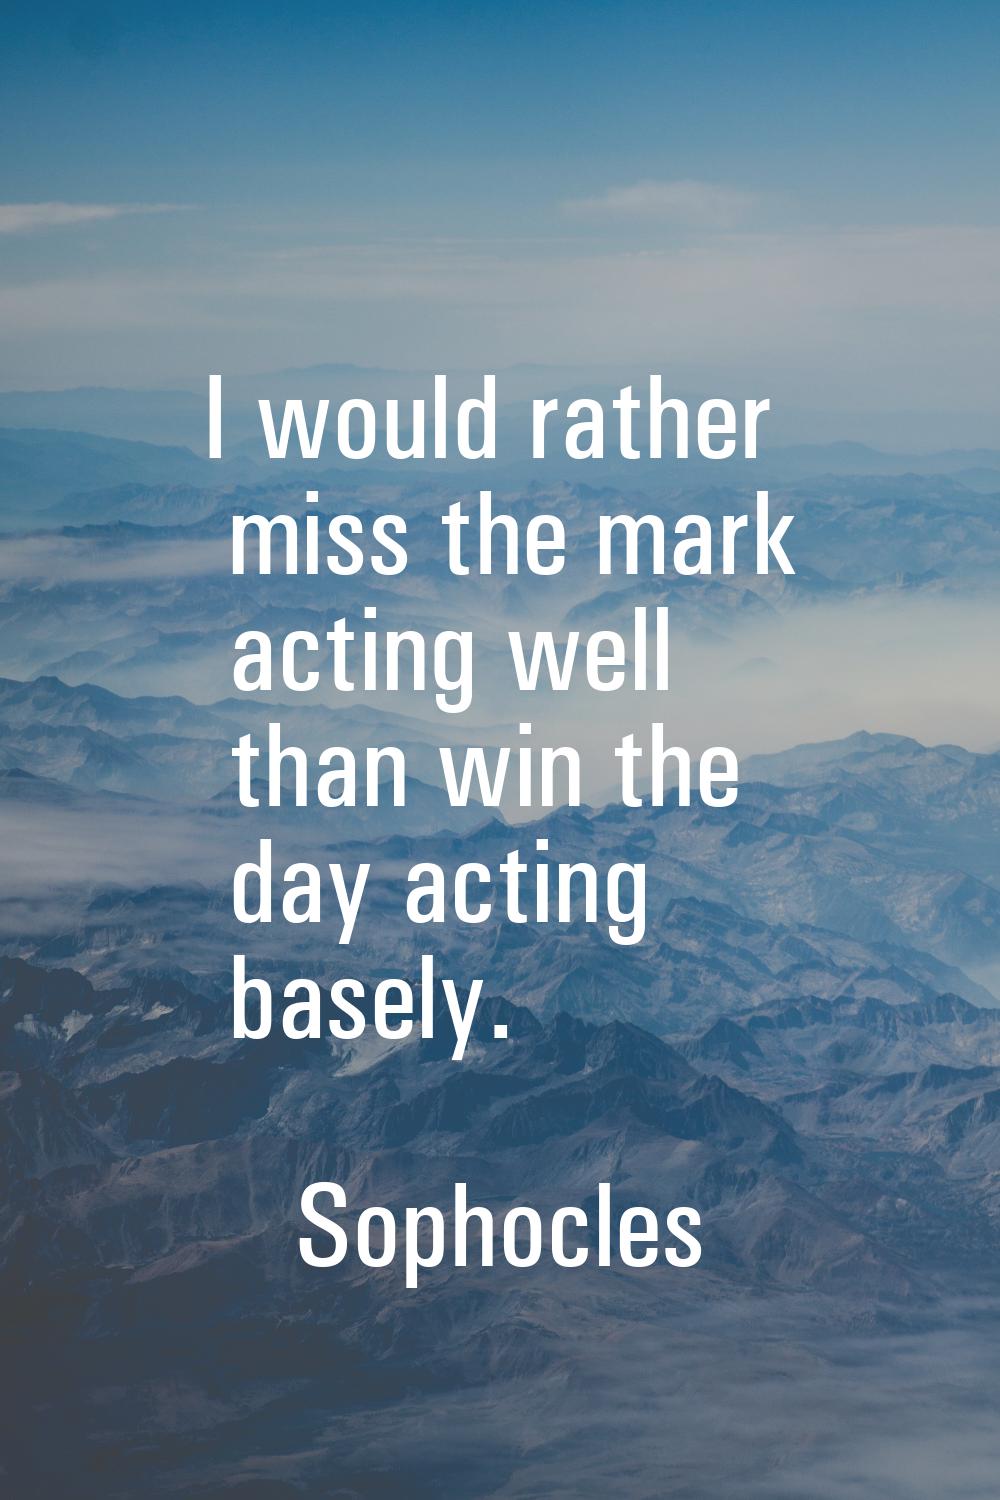 I would rather miss the mark acting well than win the day acting basely.